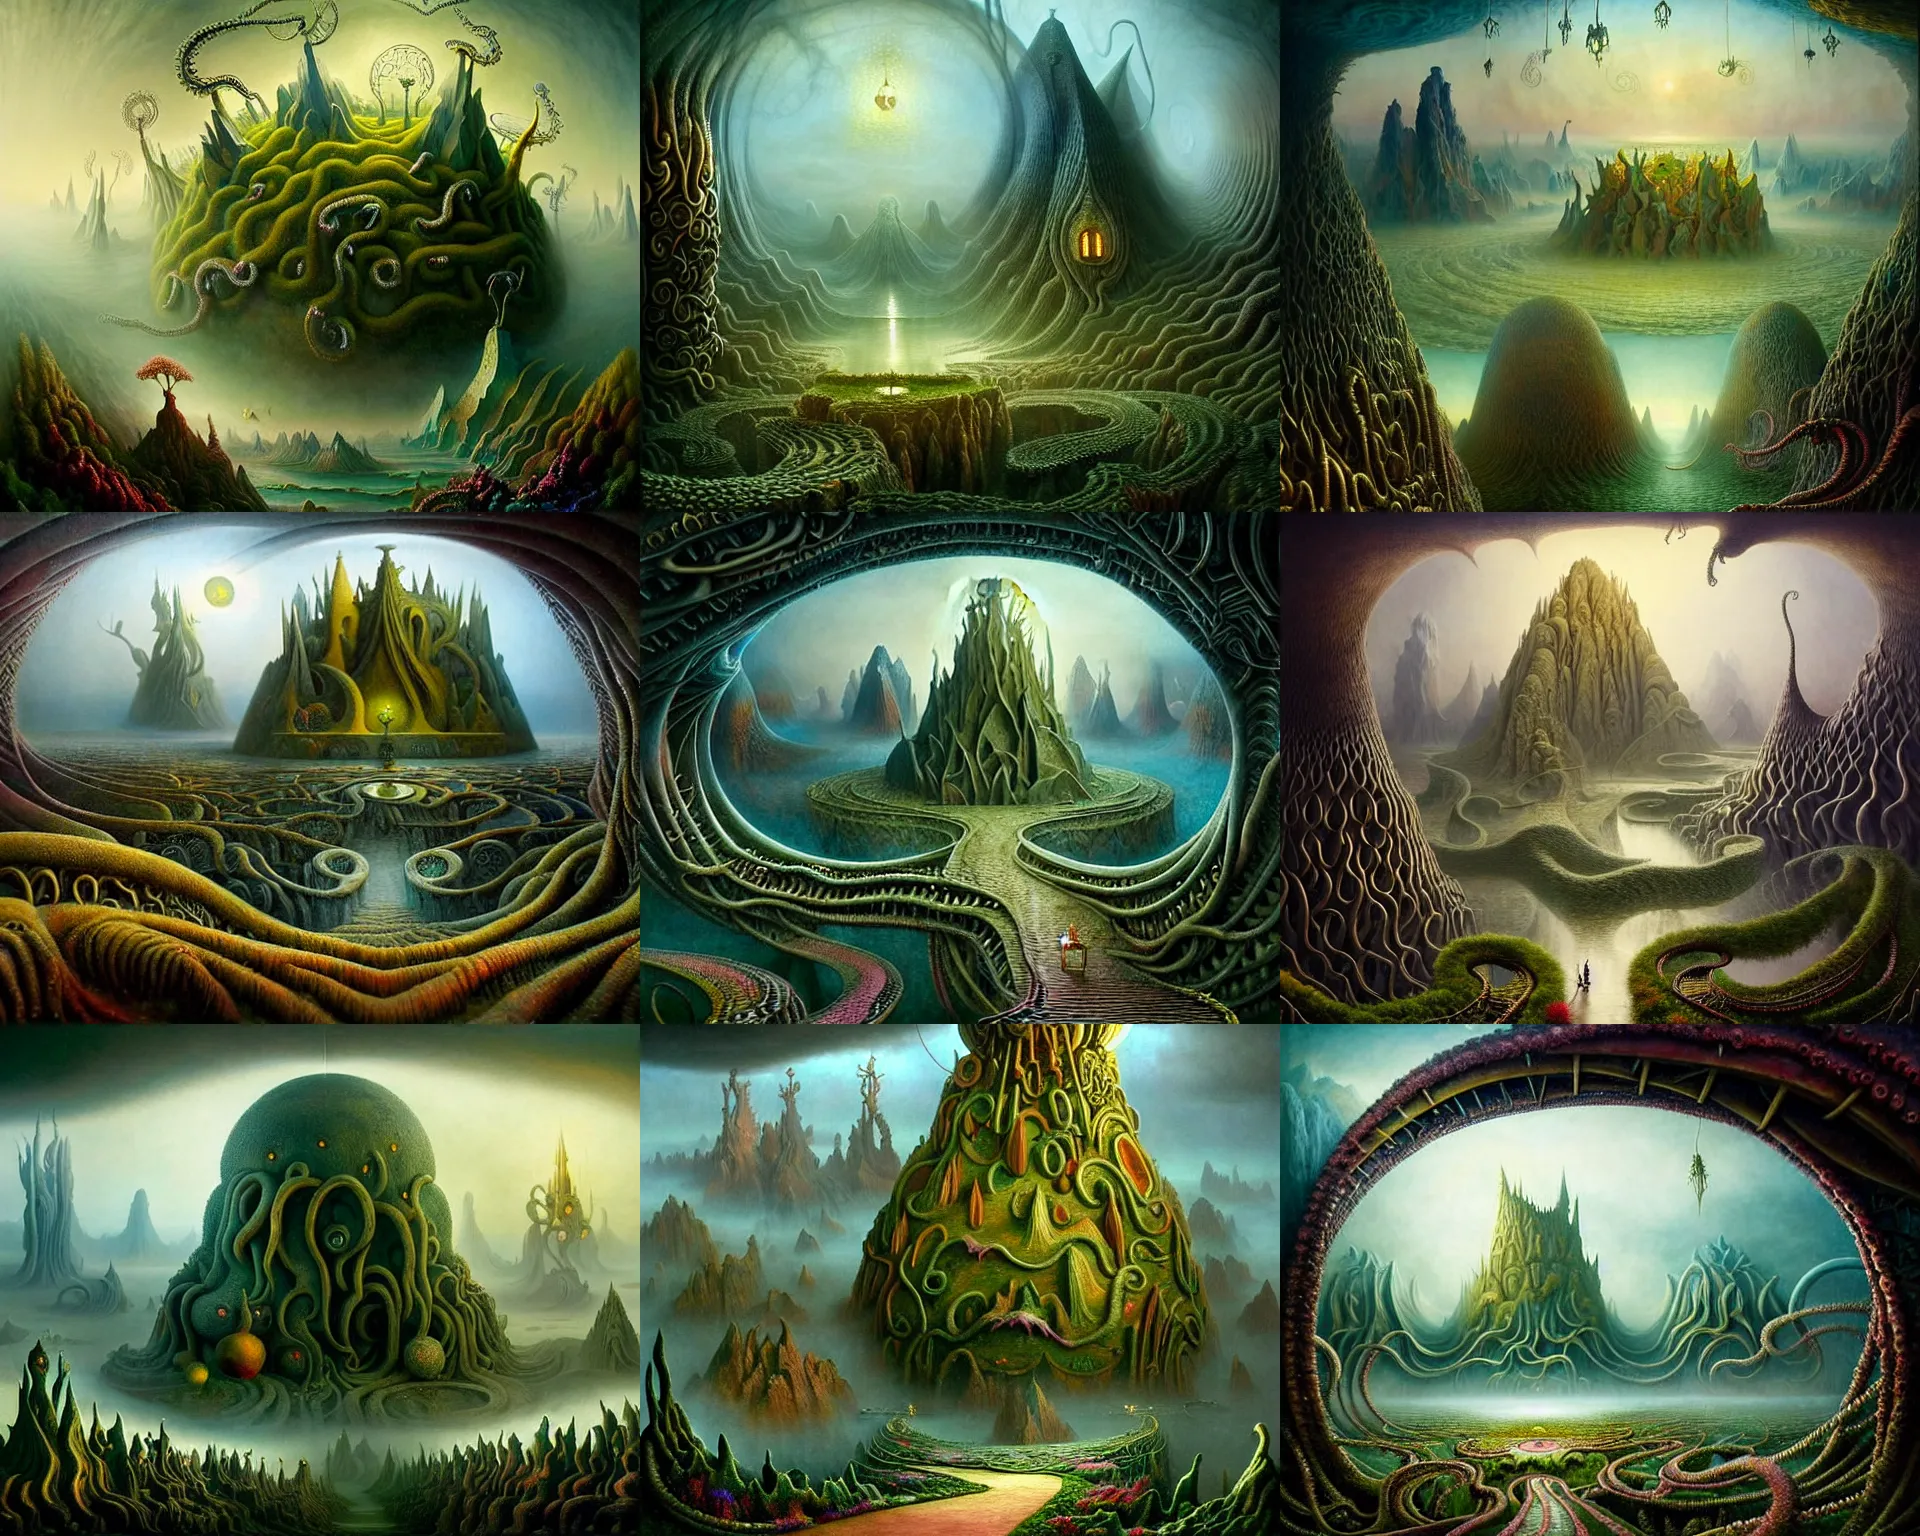 Prompt: a beguiling epic stunning beautiful and insanely detailed matte painting of the impossible winding path into lovecraftian dream worlds with surreal architecture designed by Heironymous Bosch, mega structures inspired by Heironymous Bosch's Garden of Earthly Delights, vast surreal landscape and horizon by Mike Azevedo, masterpiece!!!, grand!, imaginative!!!, whimsical!! intricate details, sense of awe, elite, wonder, insanely complex, masterful composition!!!, sharp focus, protagonist in foreground, fantasy realism, dramatic lighting